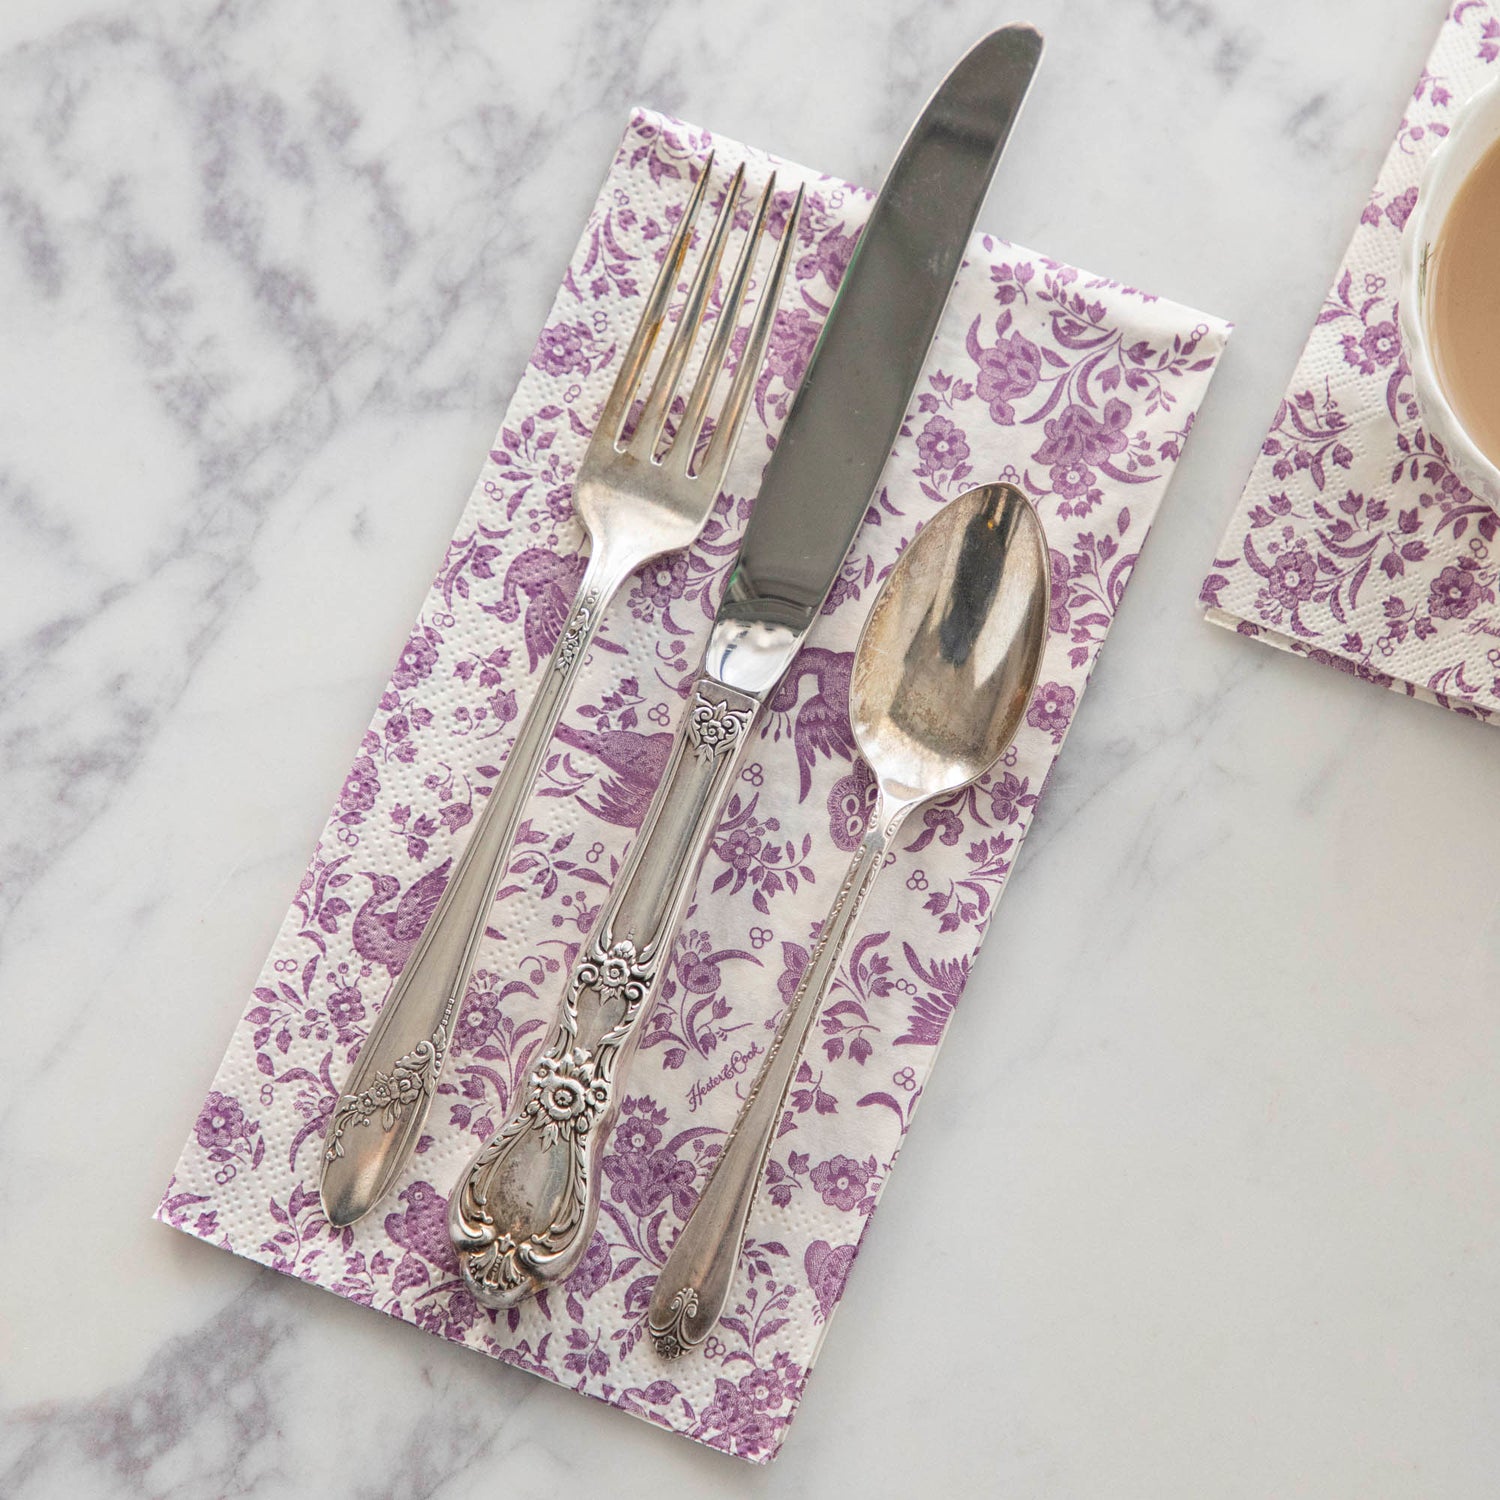 A Lilac Regal Peacock Napkins by Hester &amp; Cook resting on the colorful napkin.